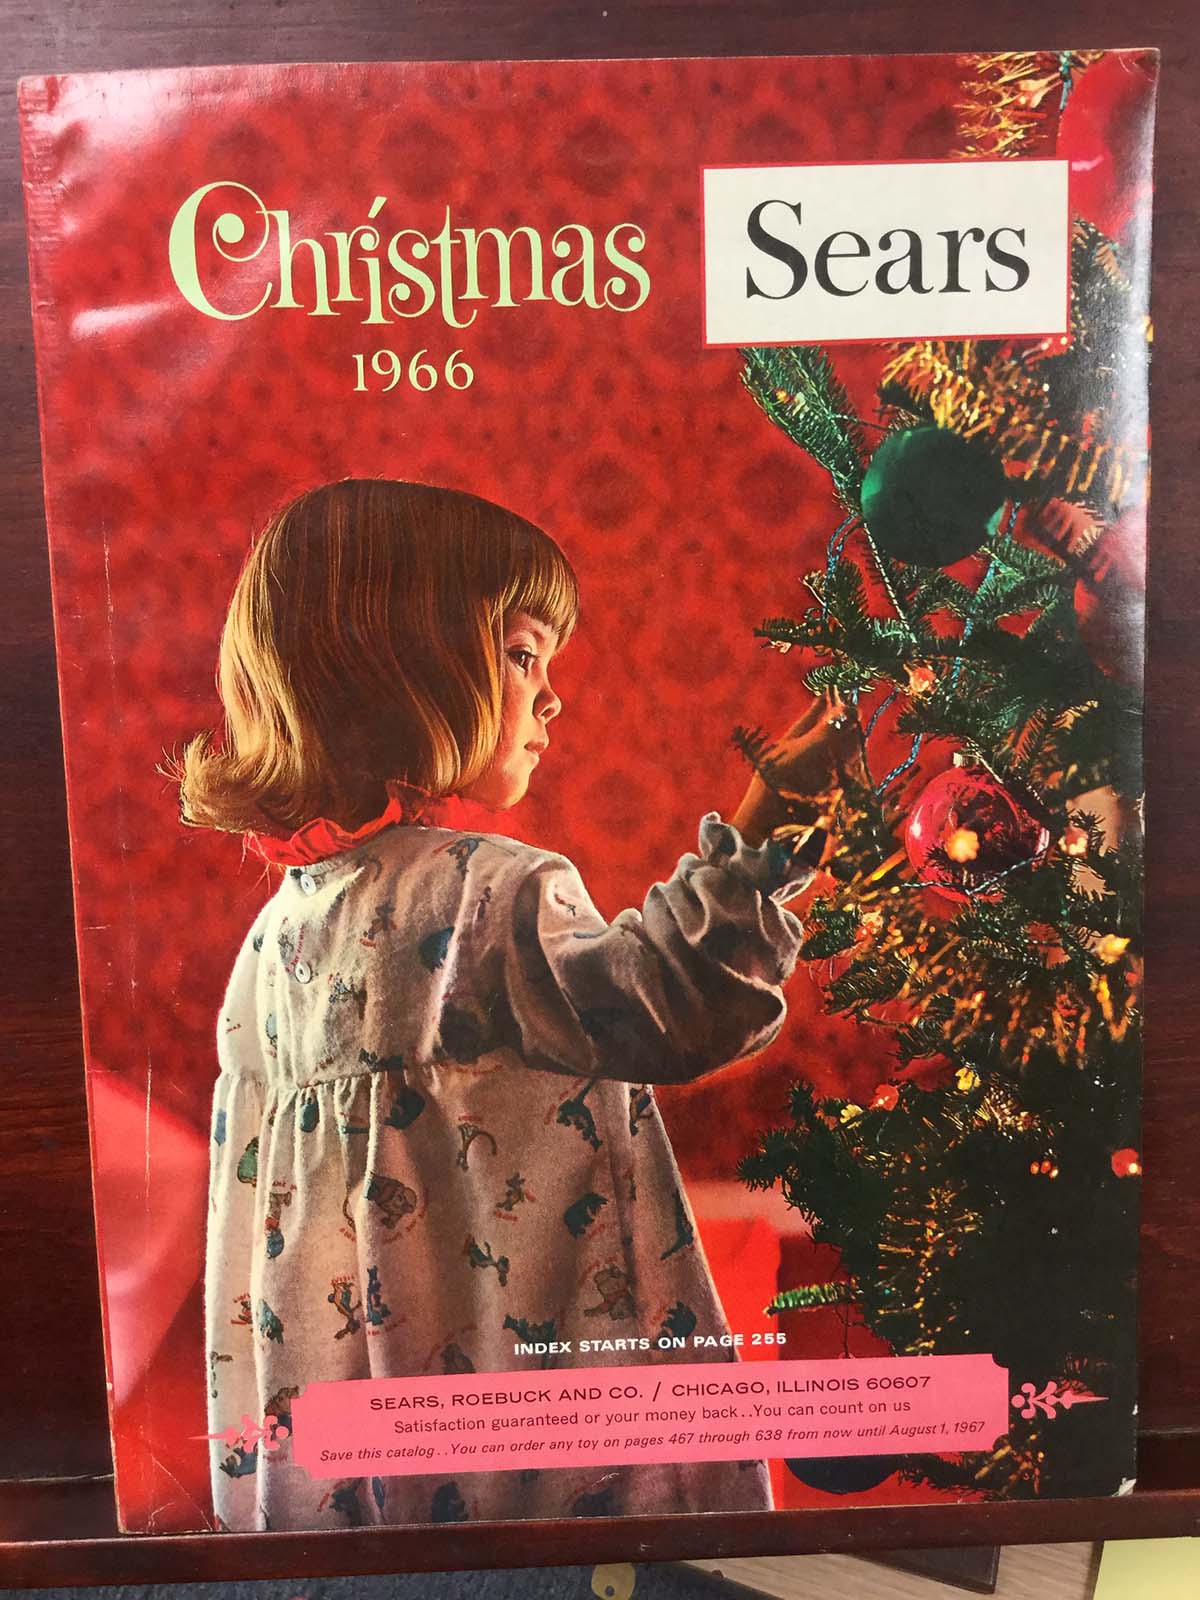 Catalogue cover showing child looking at a Christmas tree.